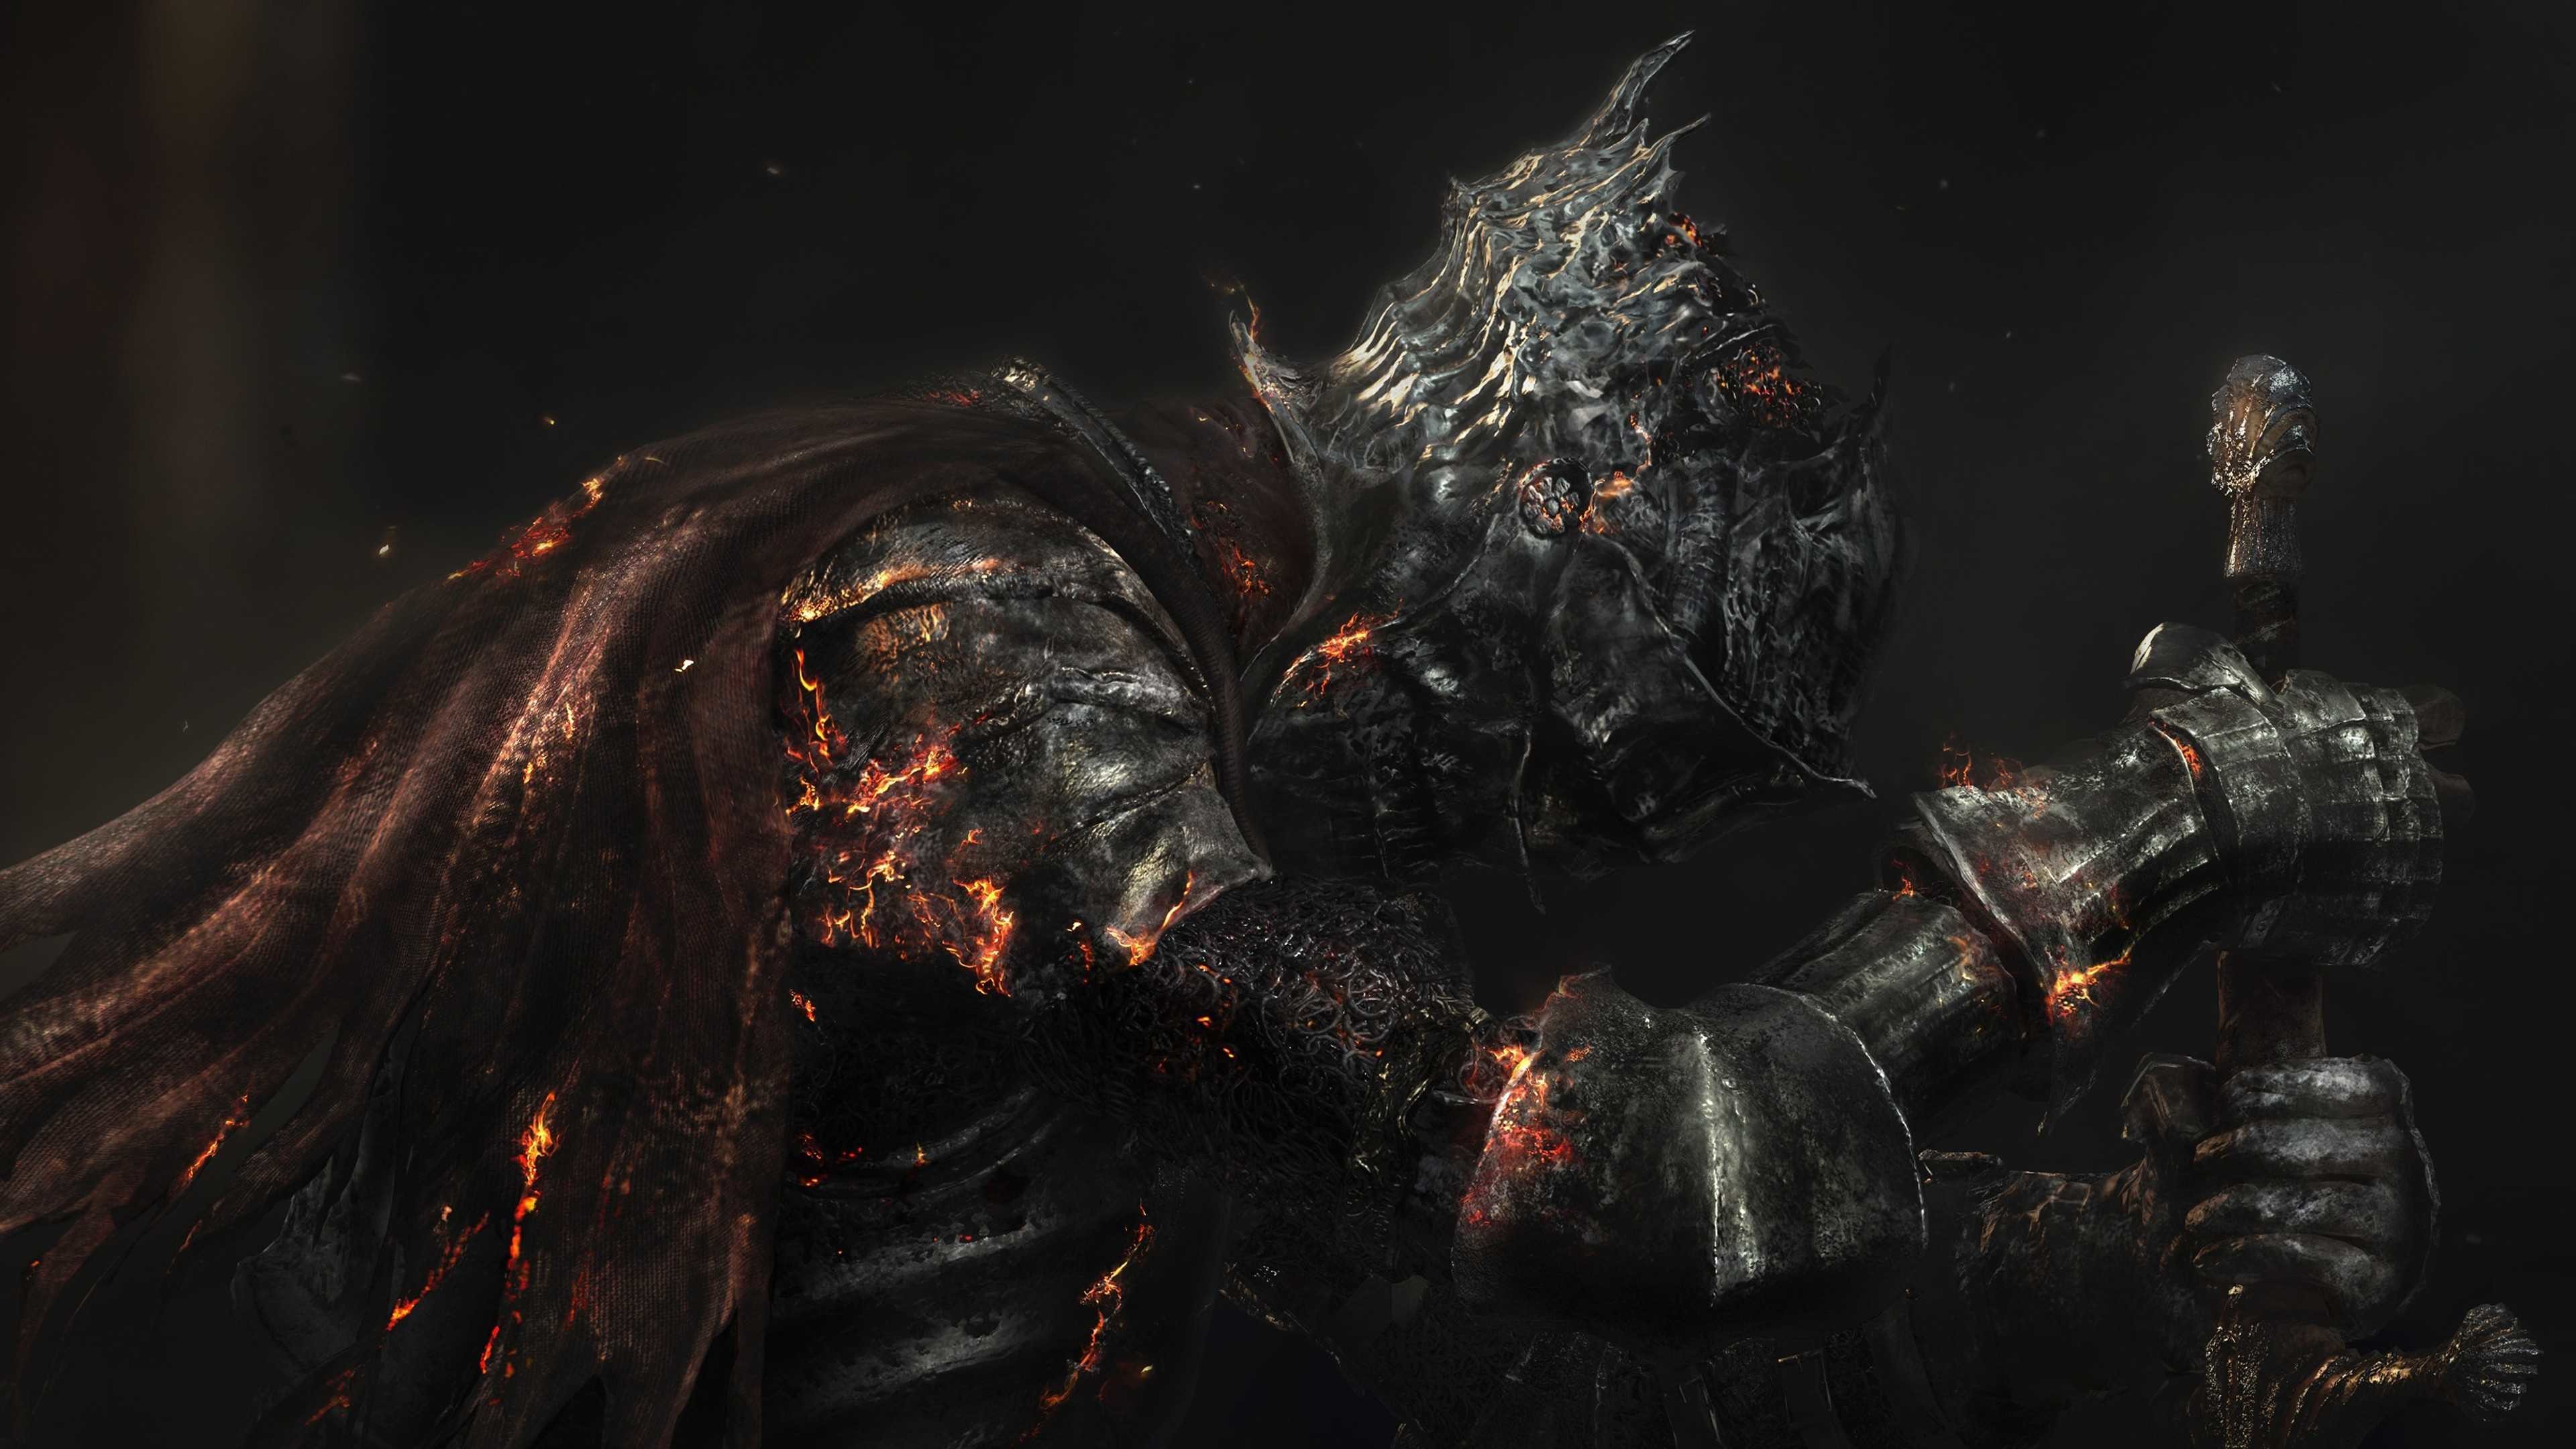 3840x2160 Dark Souls 2 Wallpaper Android DS16 - WALLEO.CO - WALLEO.CO